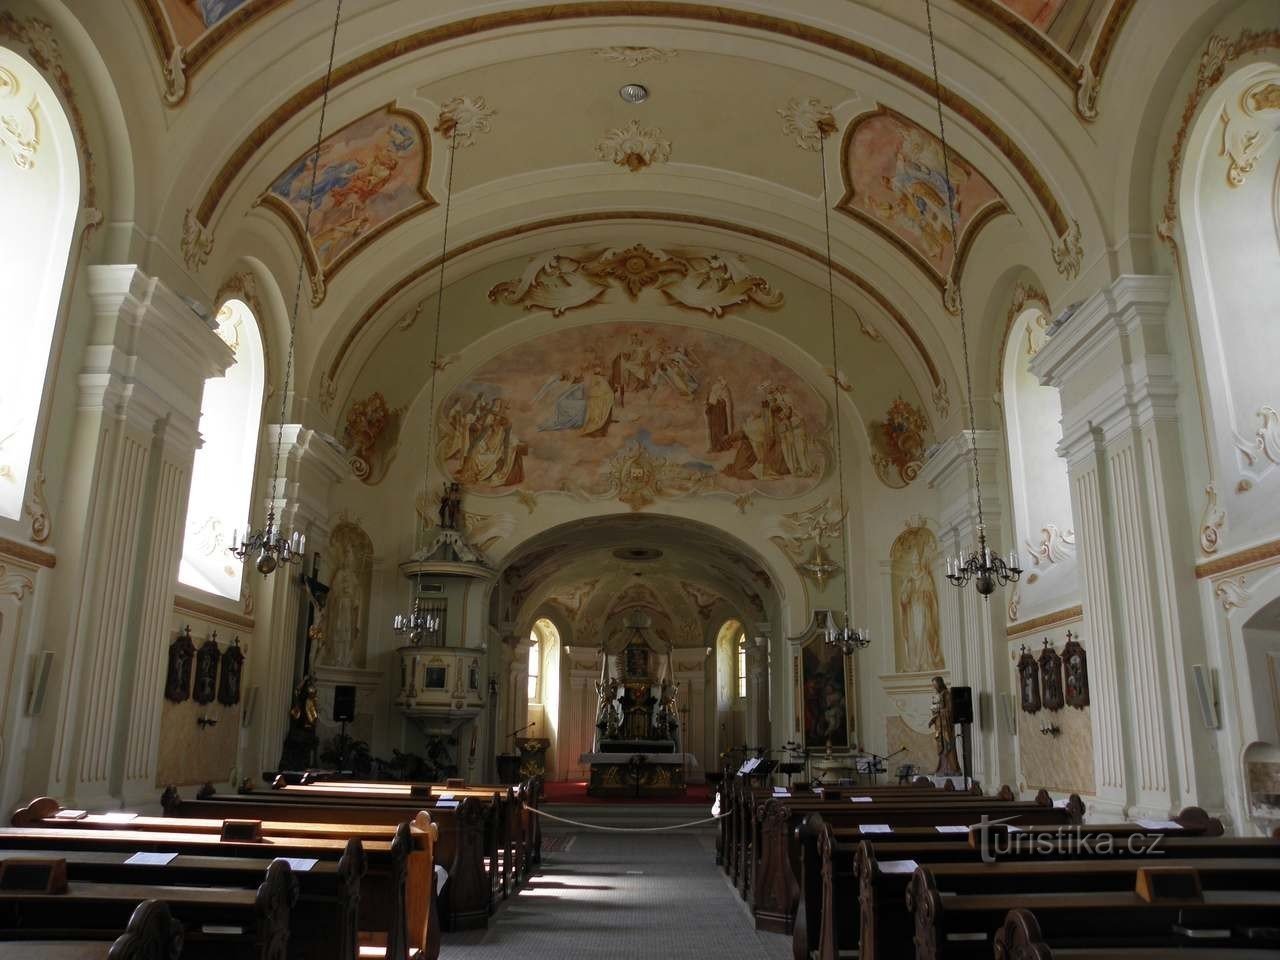 Interior of the Church of Our Lady of Mount Carmel - 31.7.2010